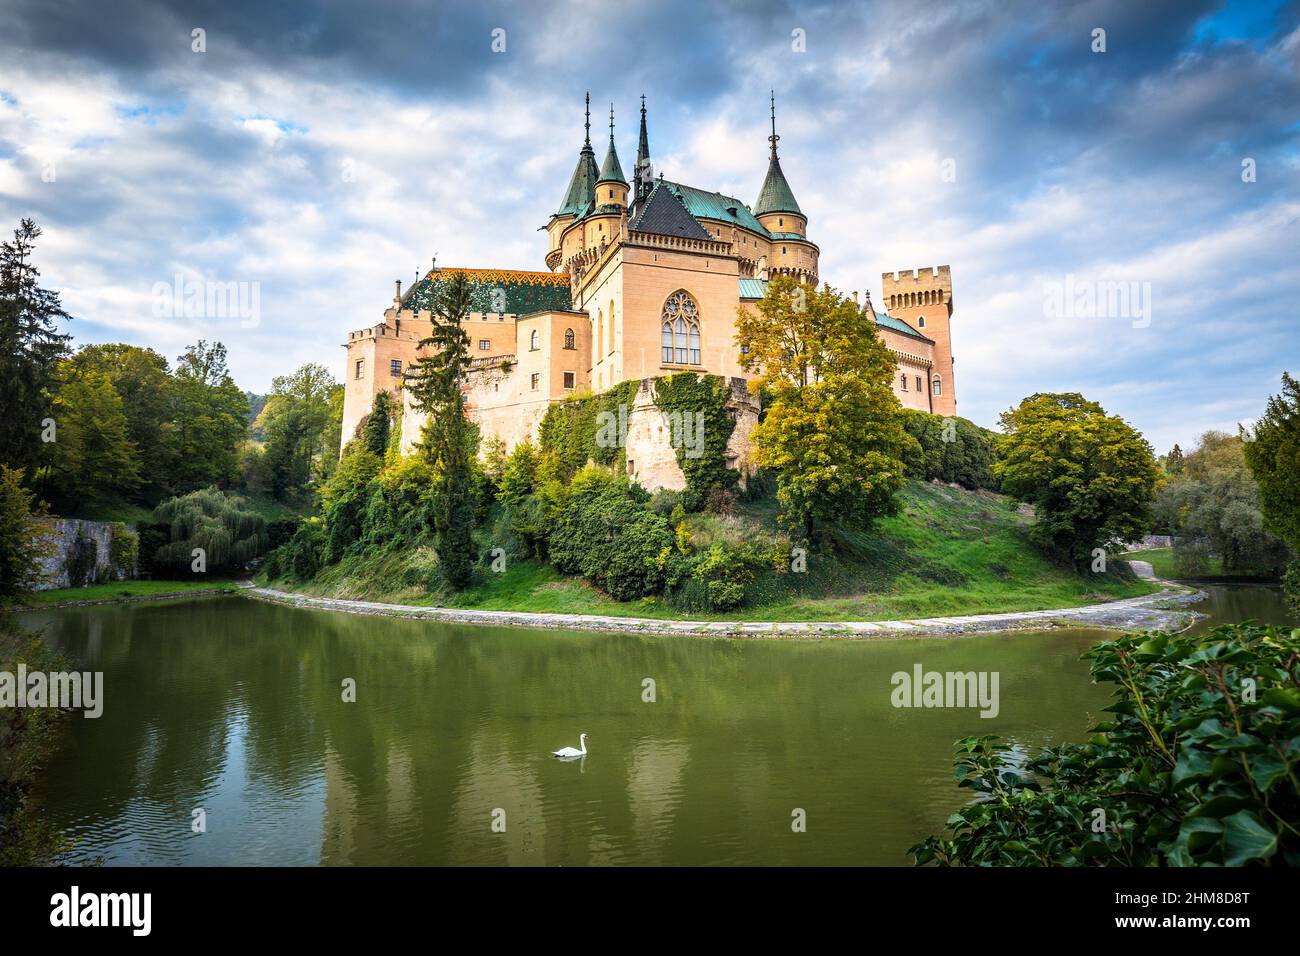 Medieval castle Bojnice over lake with swan. Dramatic illuminated blue sky with clouds. Central Europe, Slovakia. Stock Photo